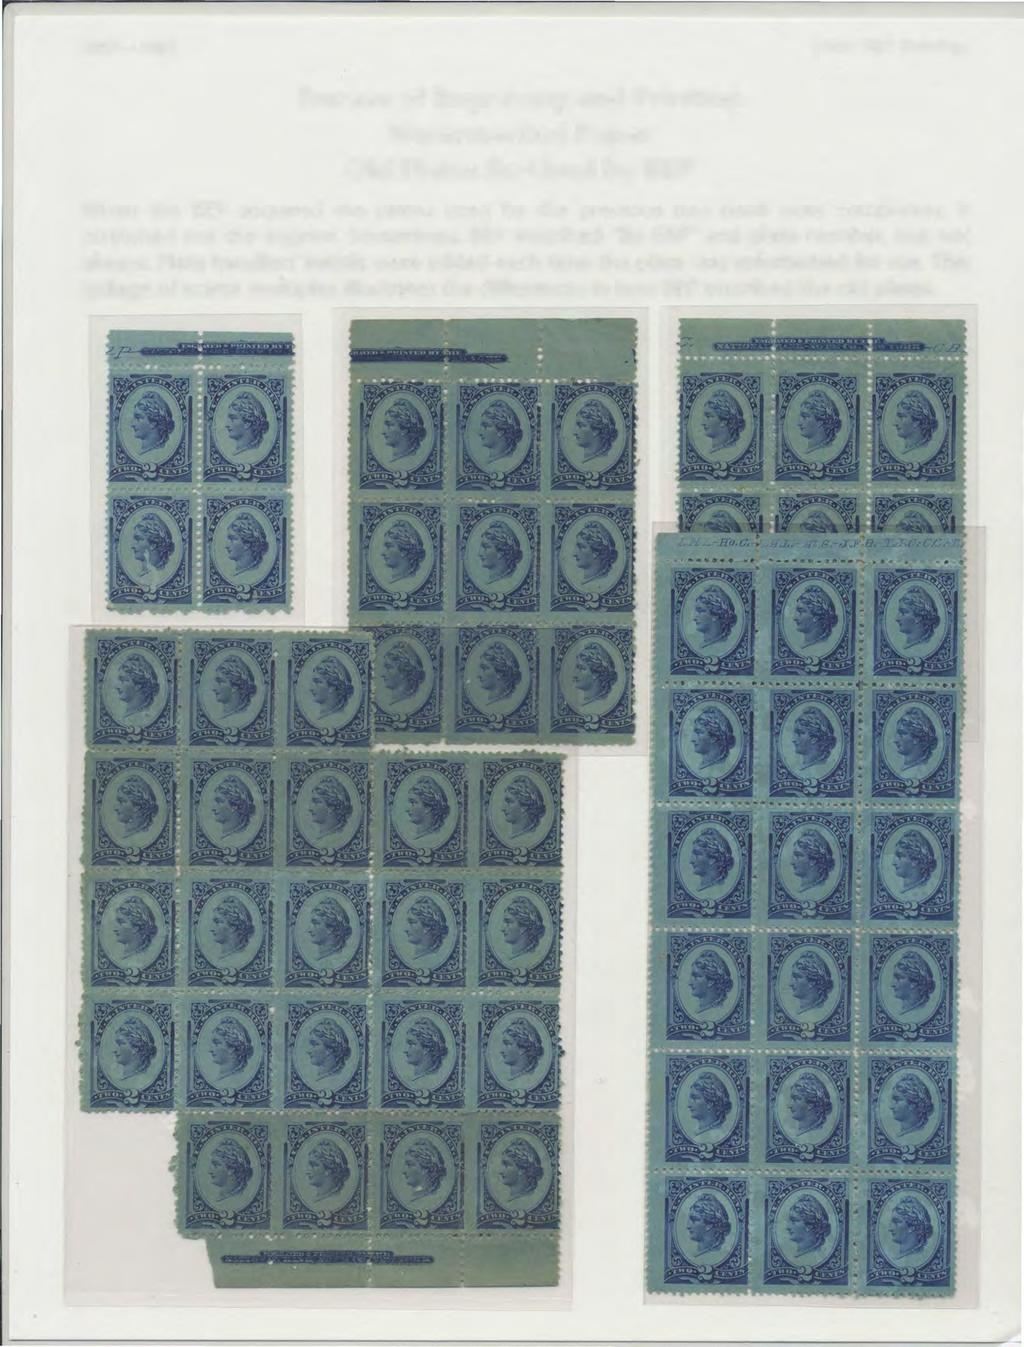 1880-1883 Initial BEP Printings Bureau of Engraving and Printing Watermarked Paper Old Plates Re-Used by BEP When the BEP acquired the plates used by the previous two bank note companies, it